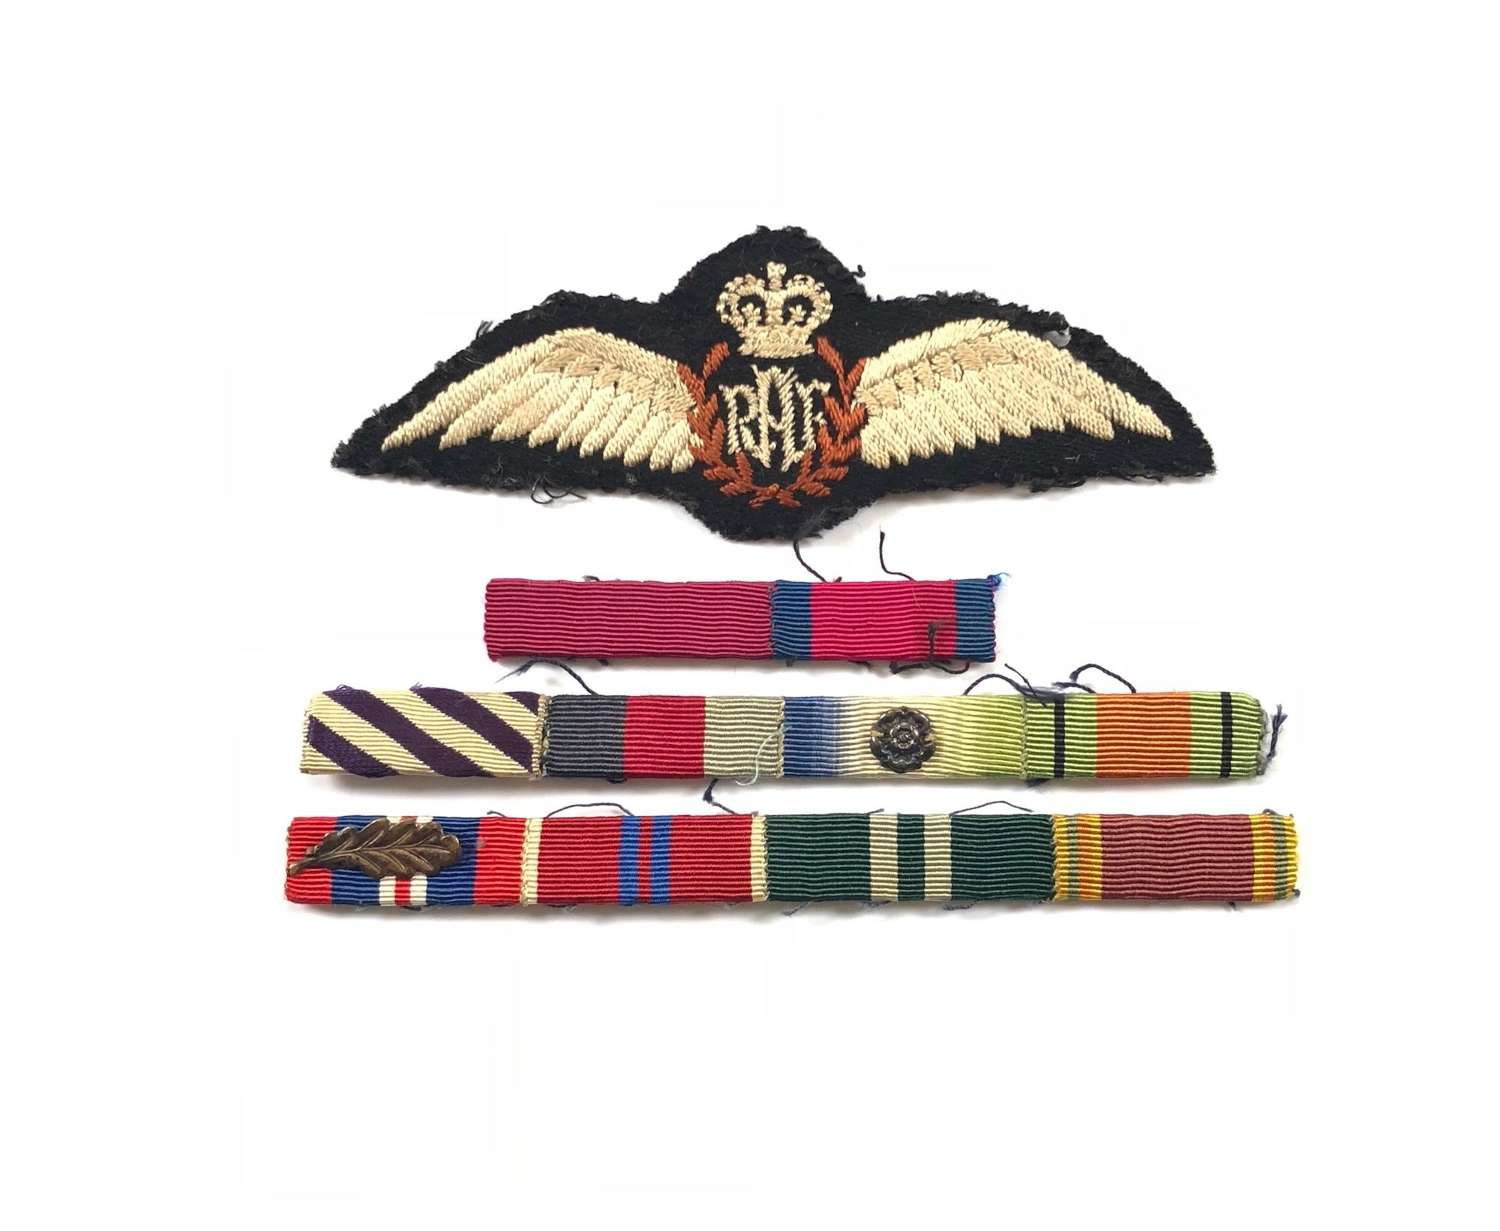 Pilot Wings Medal Ribbons of Air Vice Marshal Thomson CB, DSO, DFC.